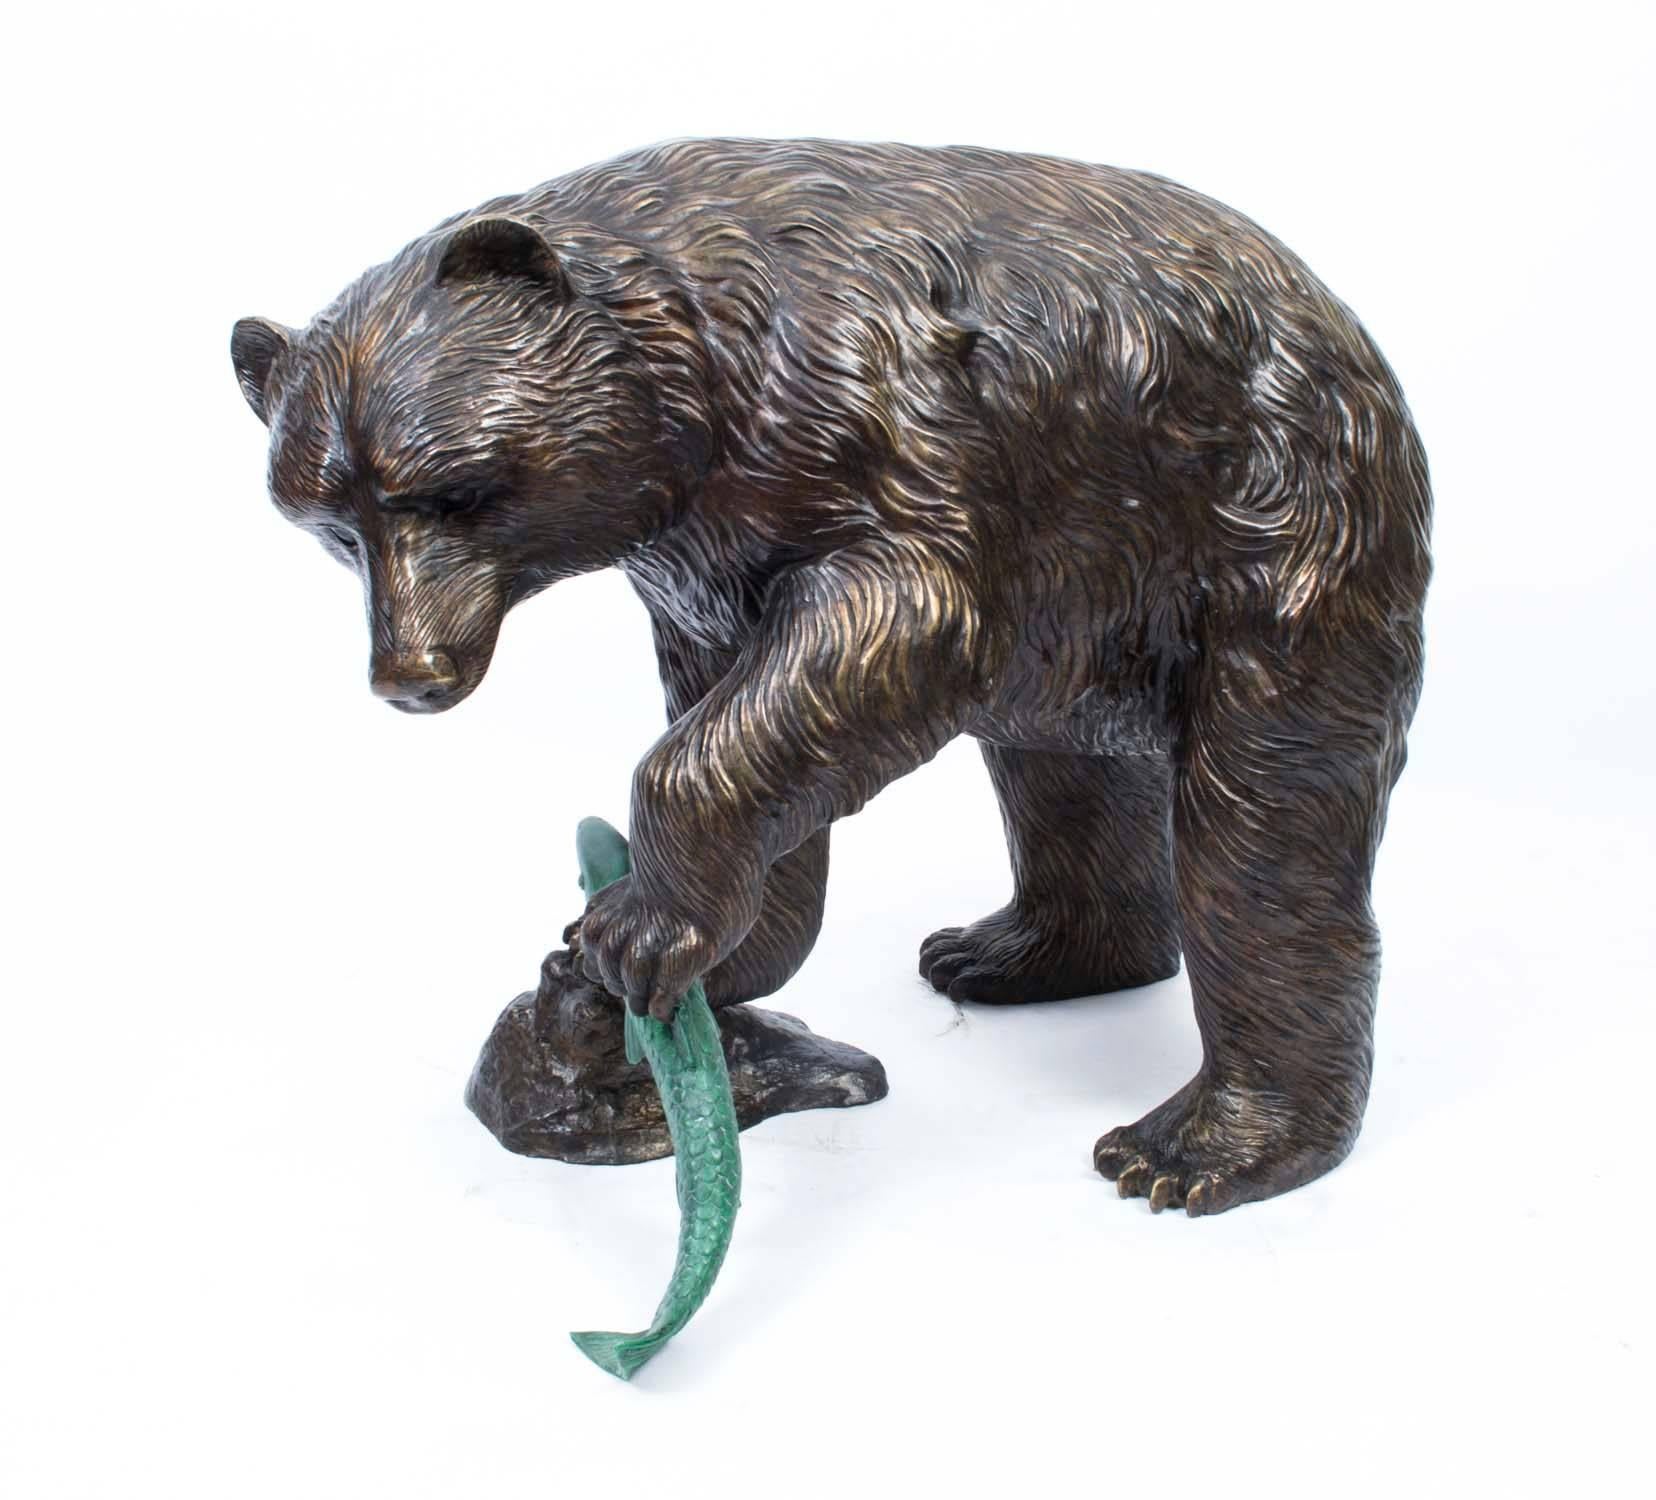 This is an interesting bronze sculpture of a wild grizzly bear with golden patinated fur who has caught a green patinated salmon in his paw.

It dates from the last quarter of the 20th century.

This figure is extremely lifelike and the